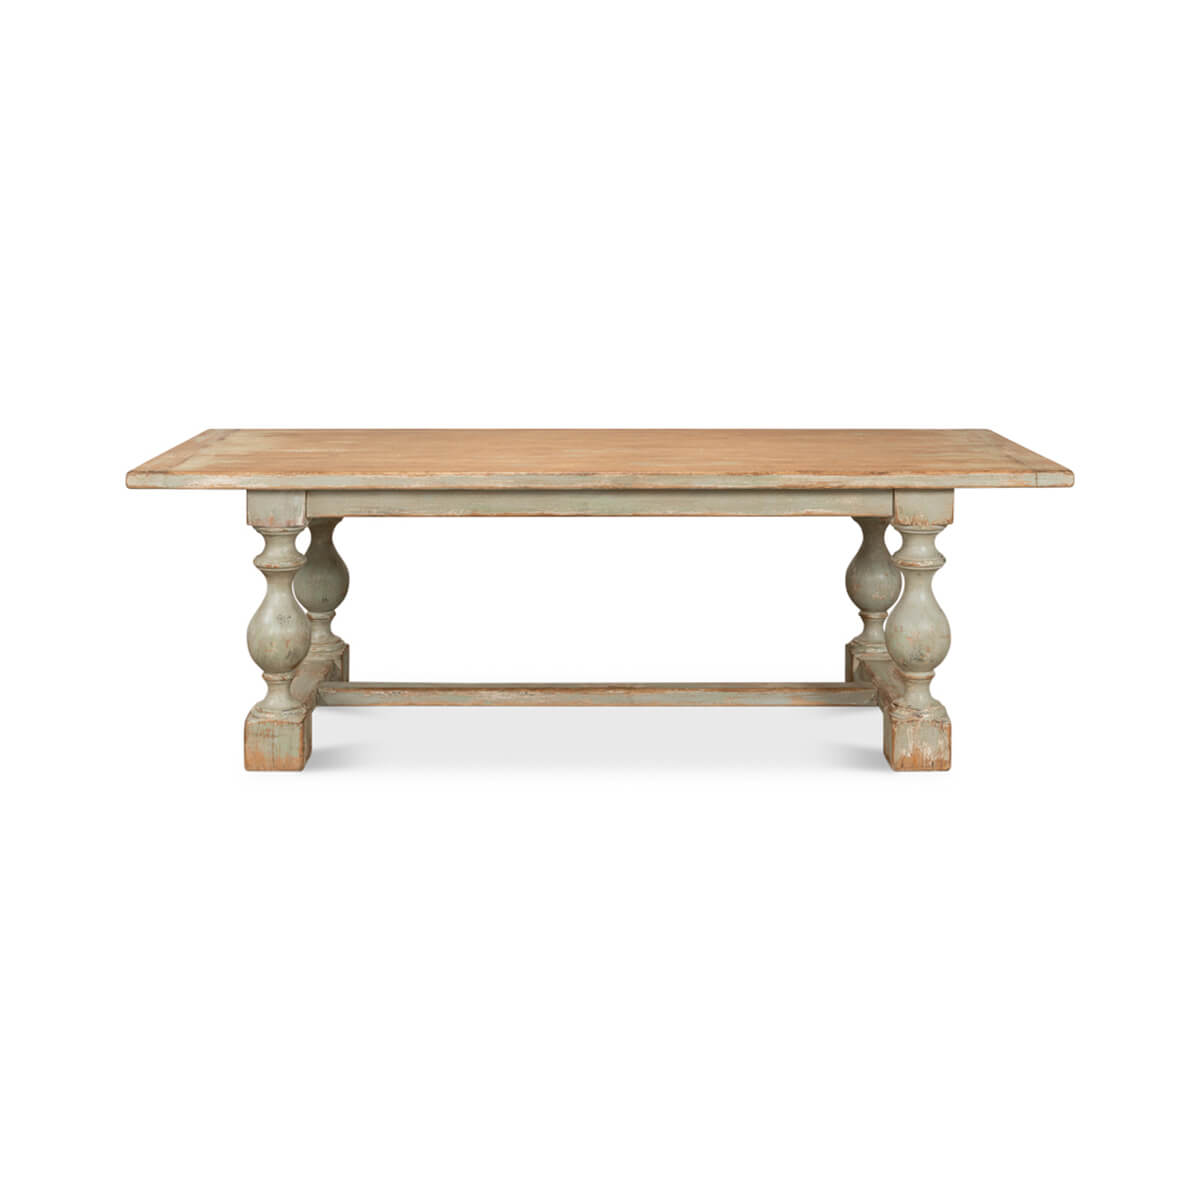 English Country Antique Sage Dining Table - English Georgian America